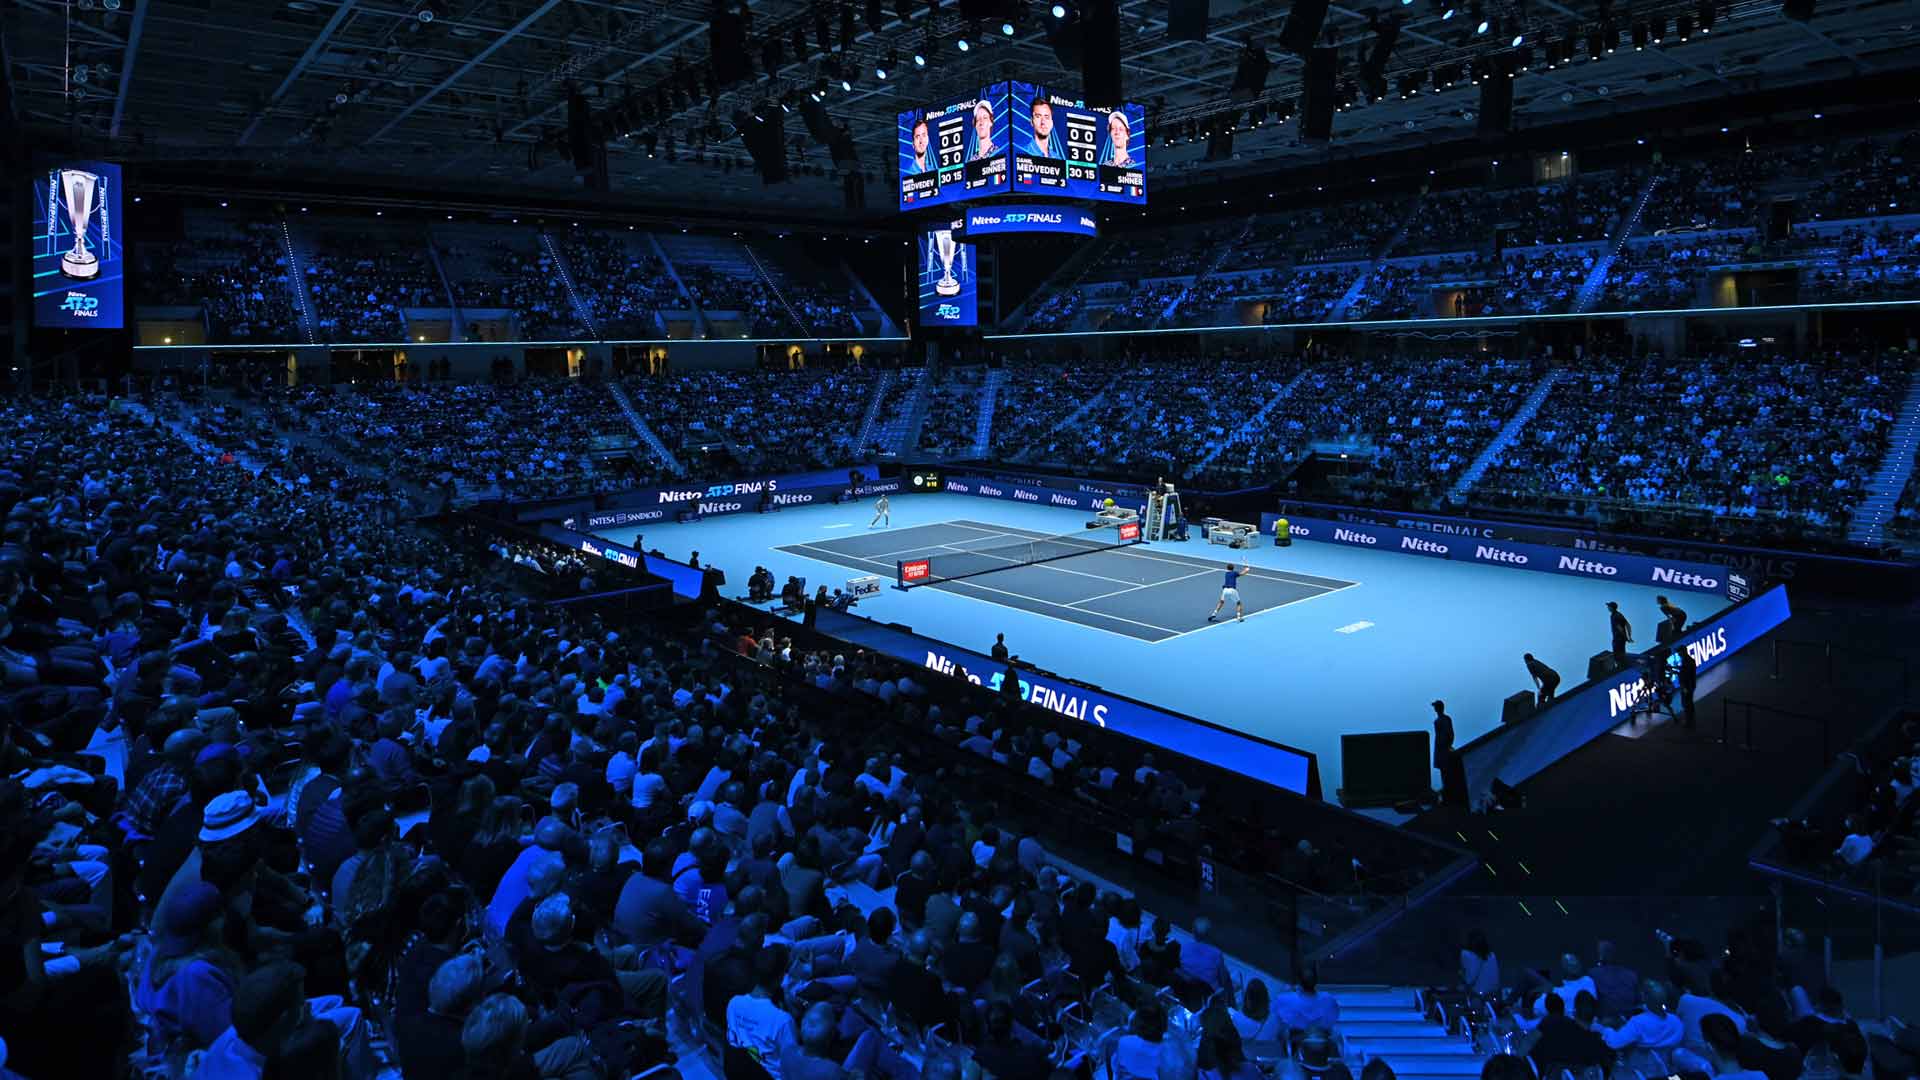 The Nitto ATP Finals is held at the Pala Alpitour in Turin.